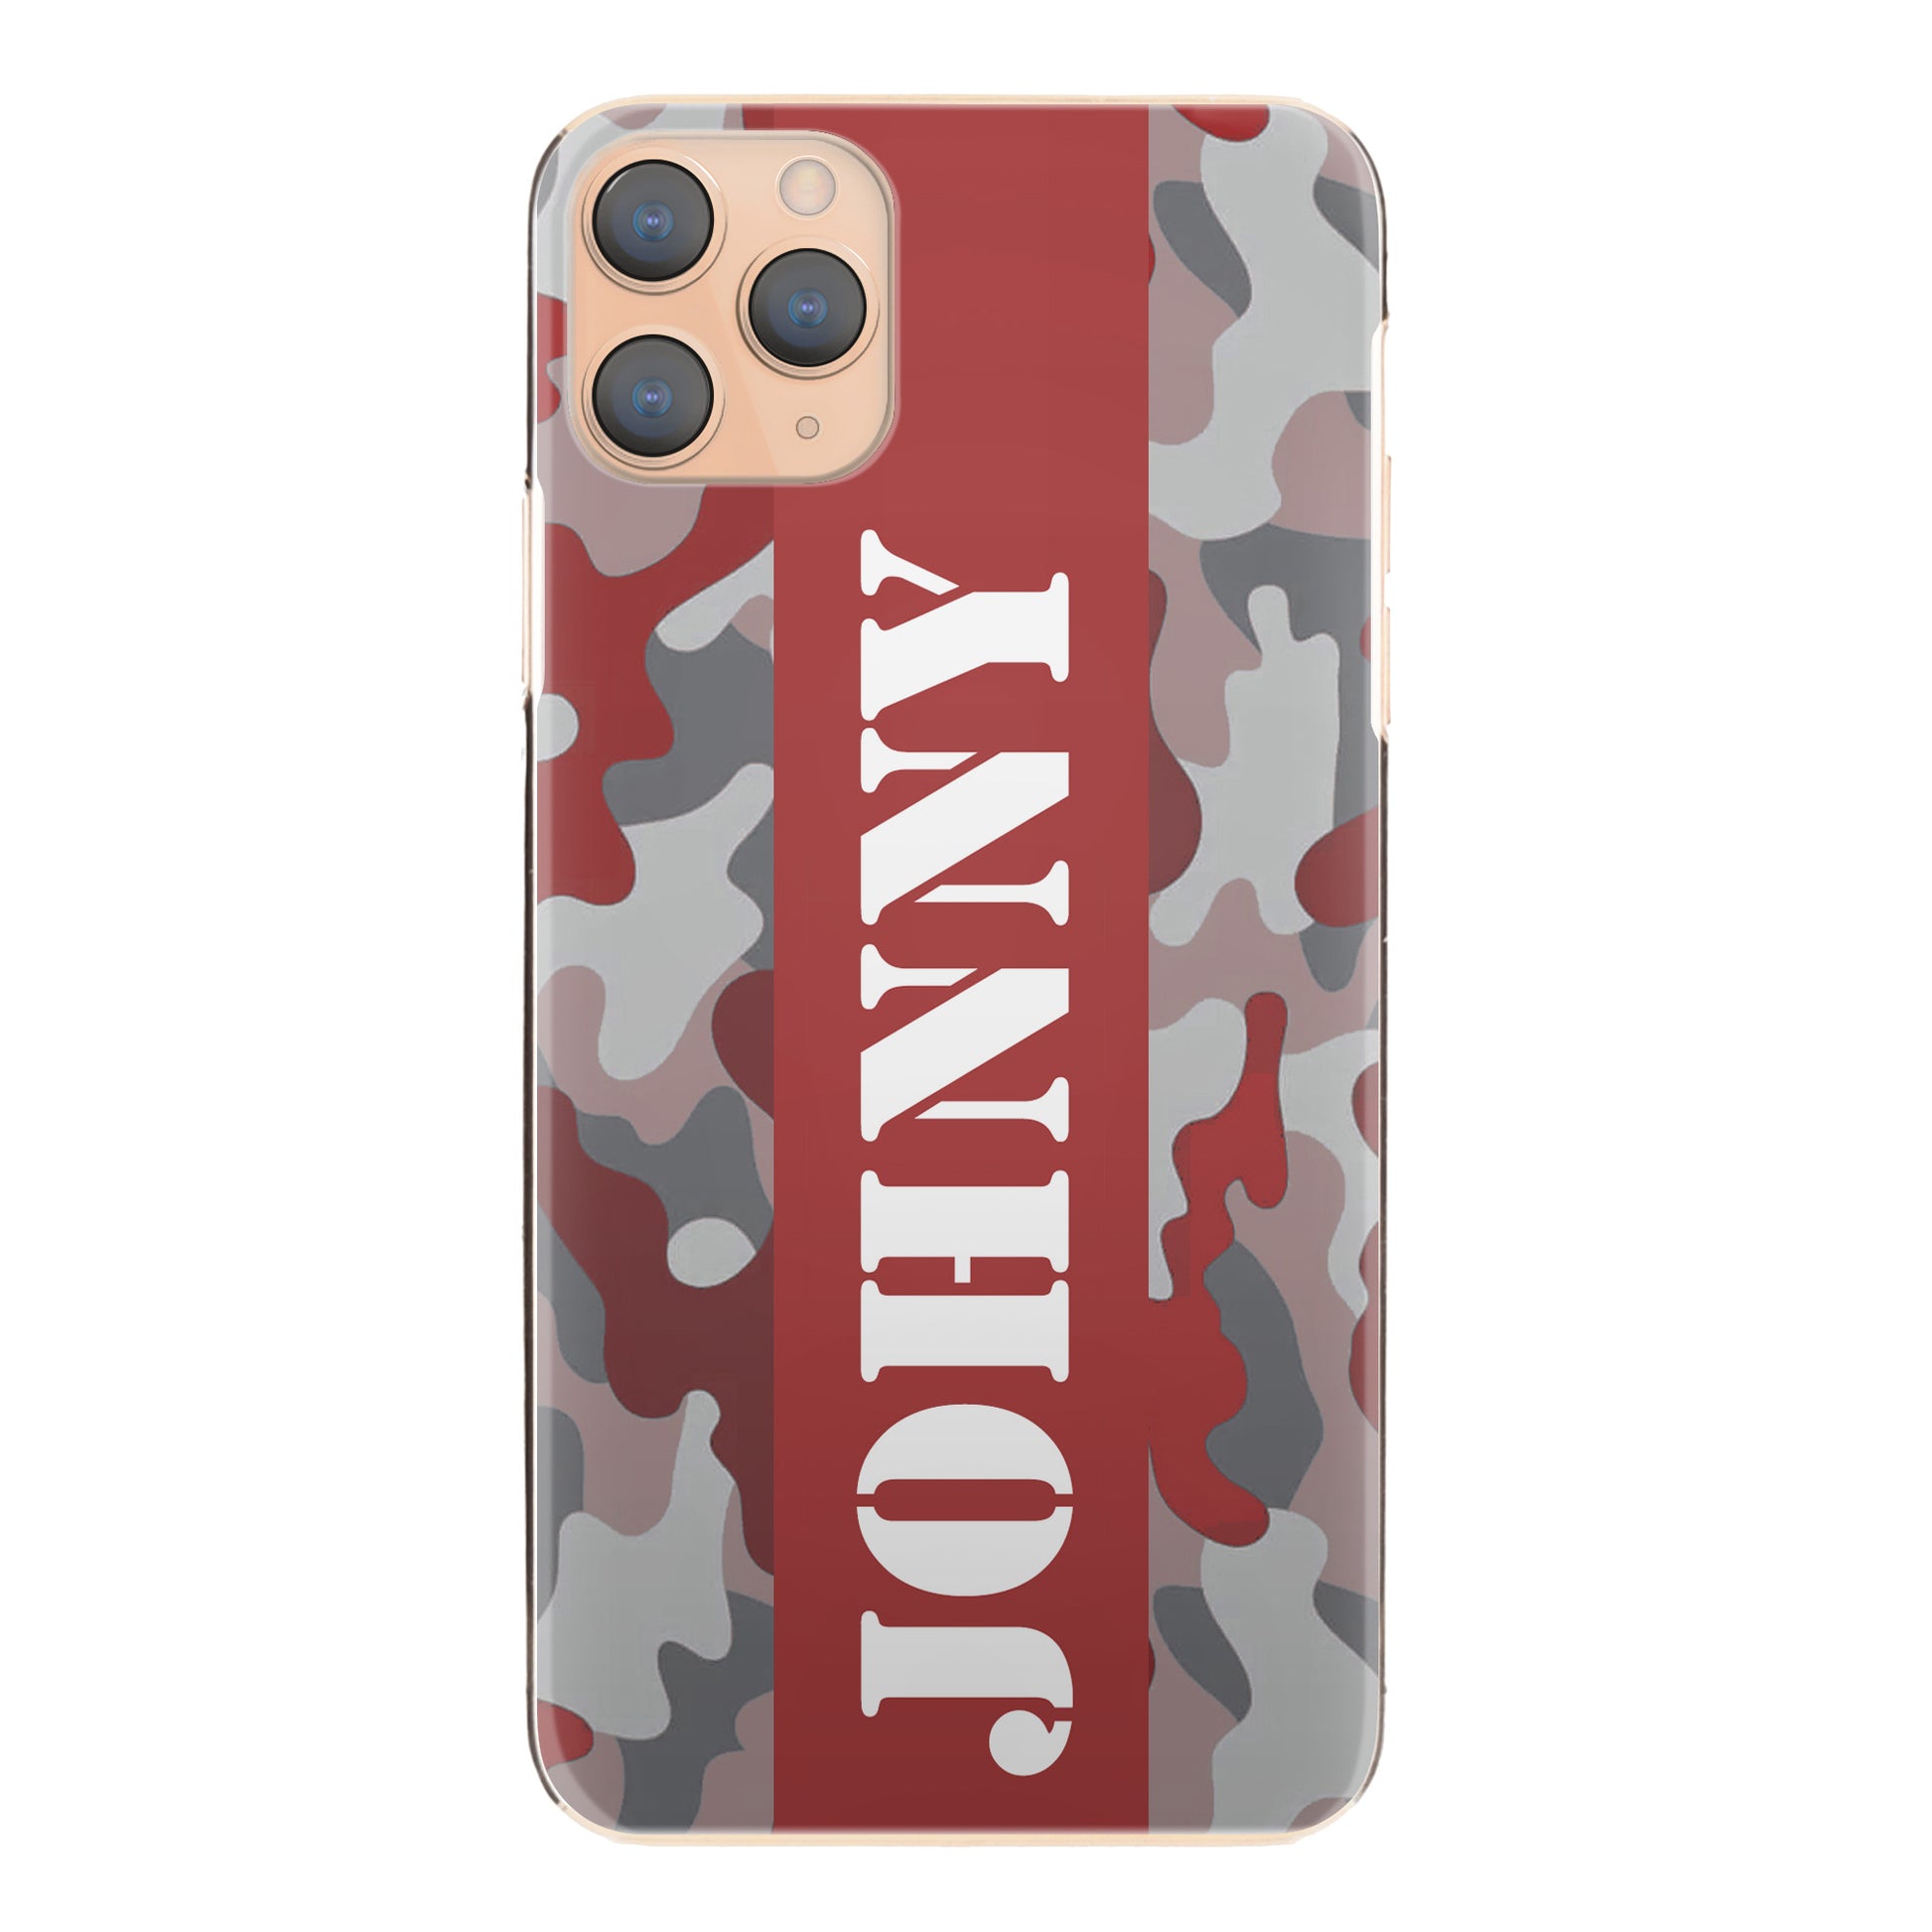 Personalised Sony Phone Hard Case with Military Text on Red Camo